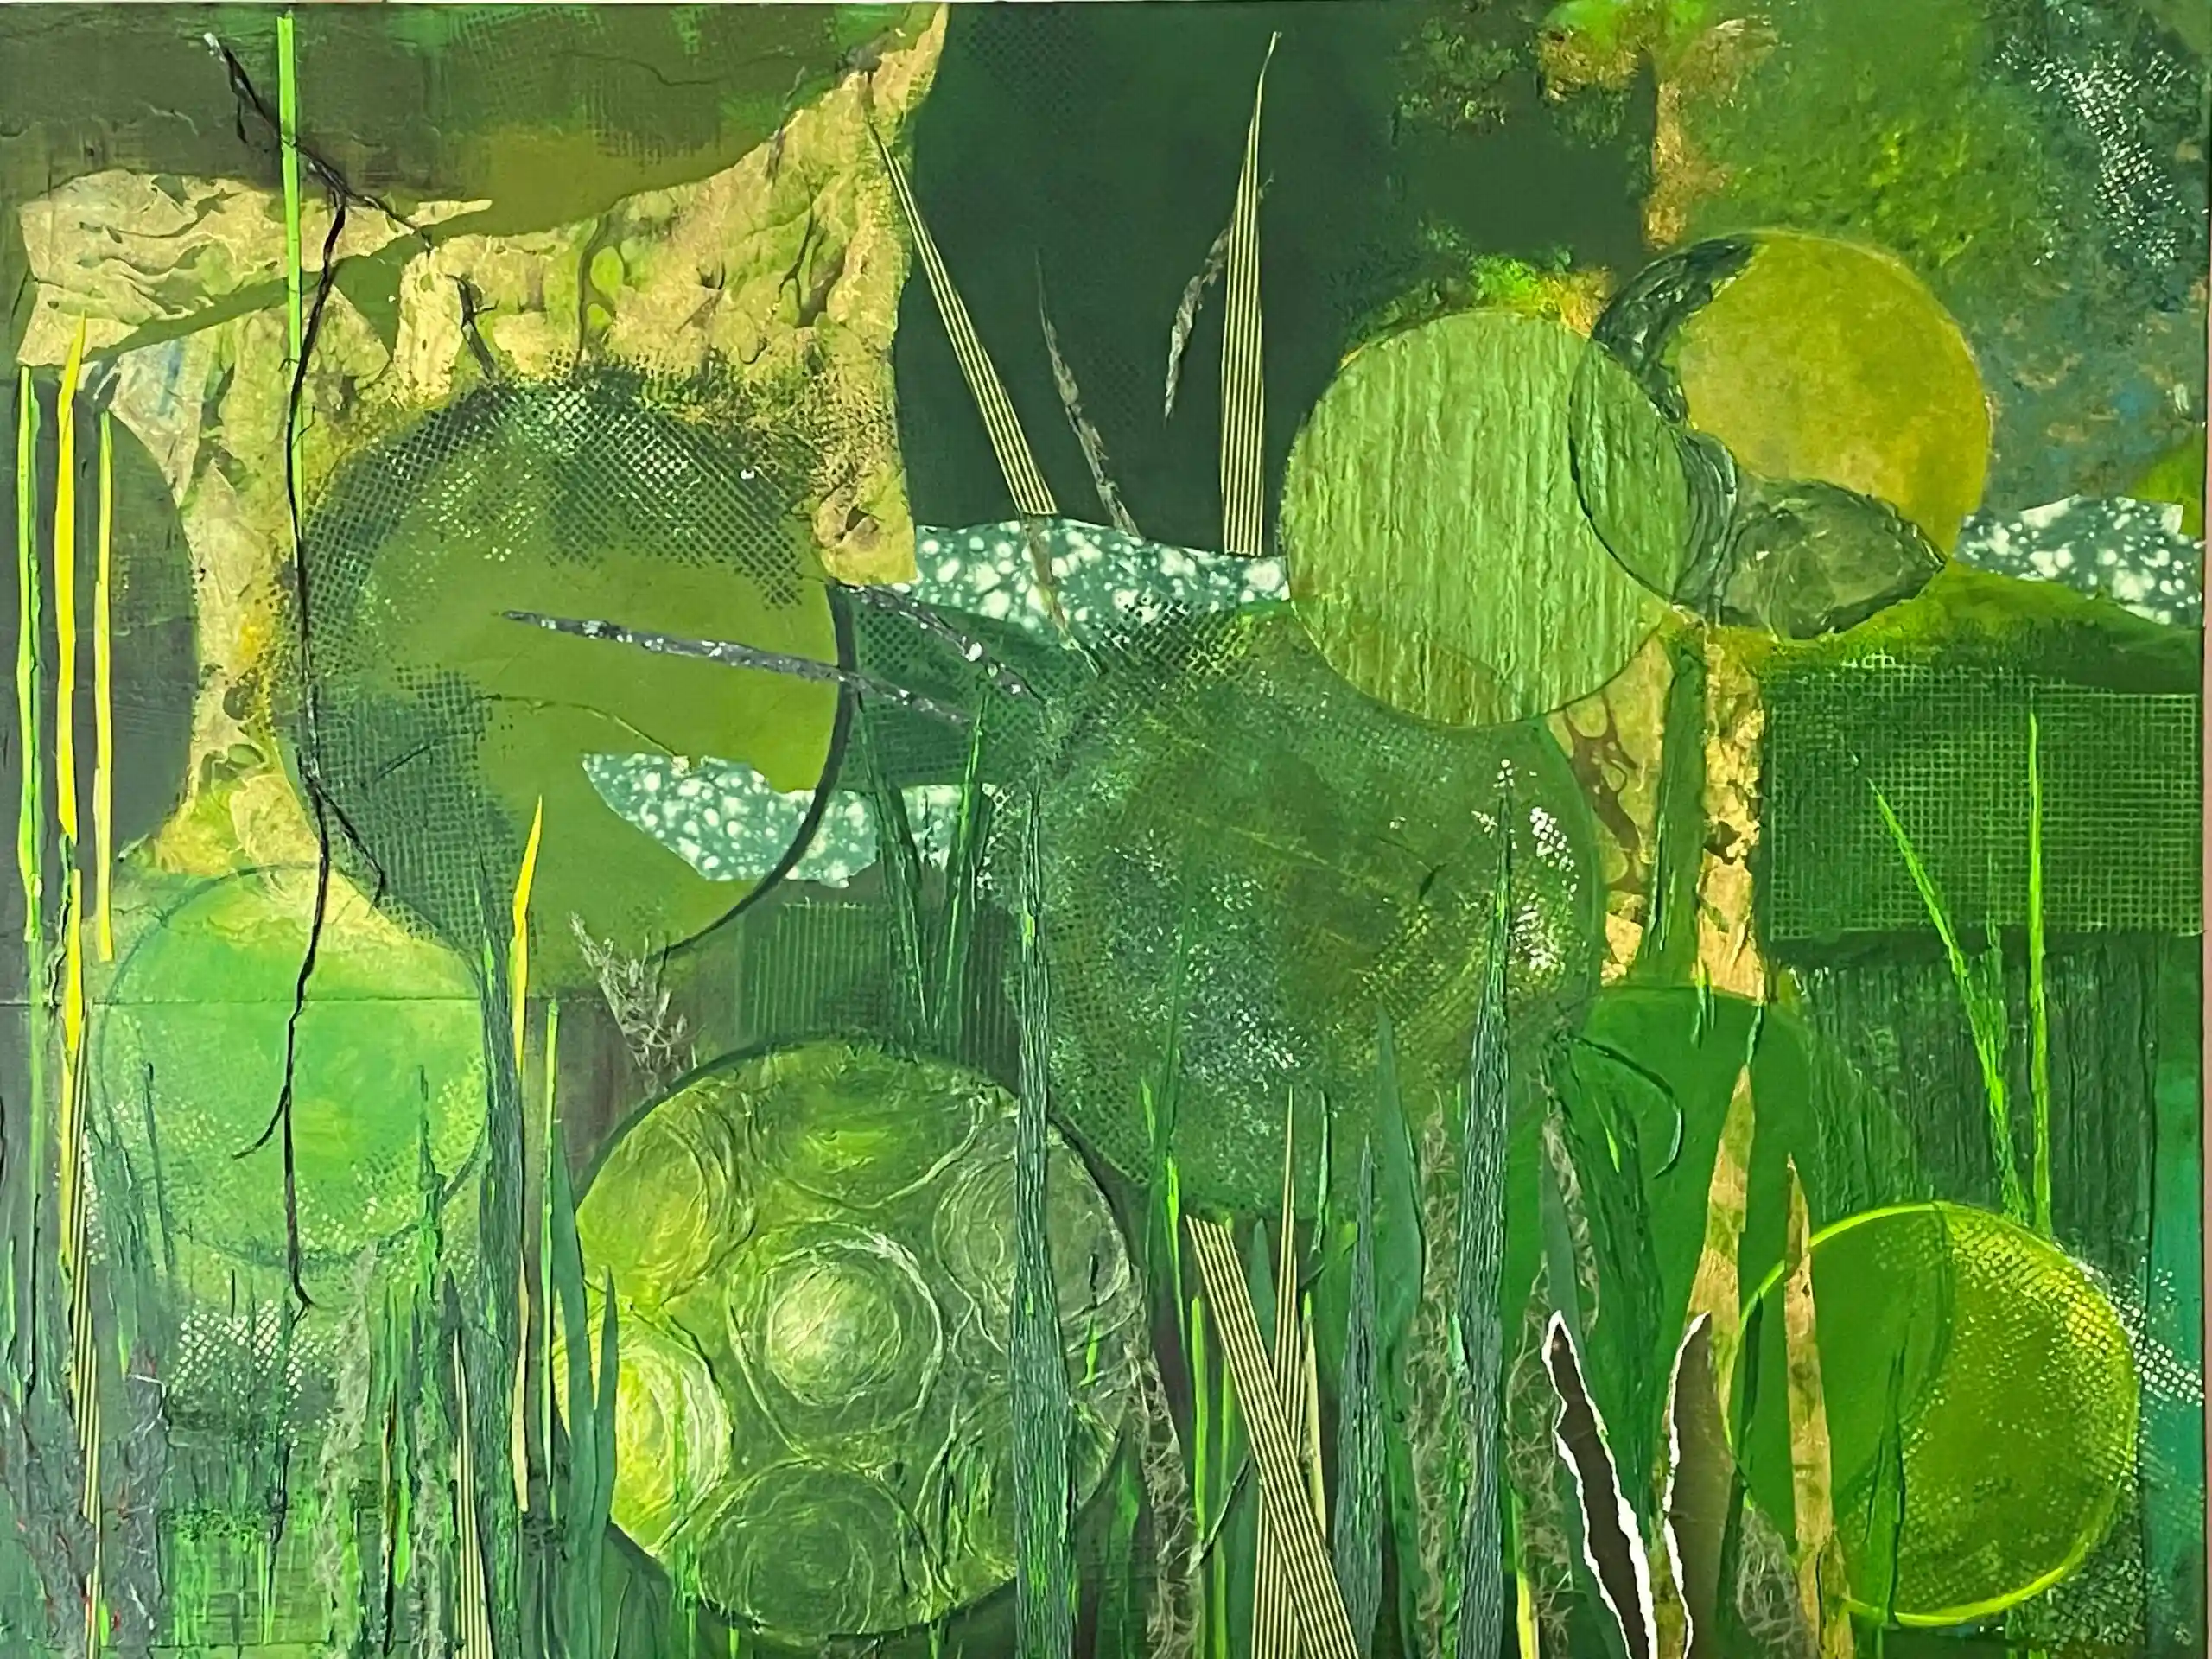 A painting of green plants and trees